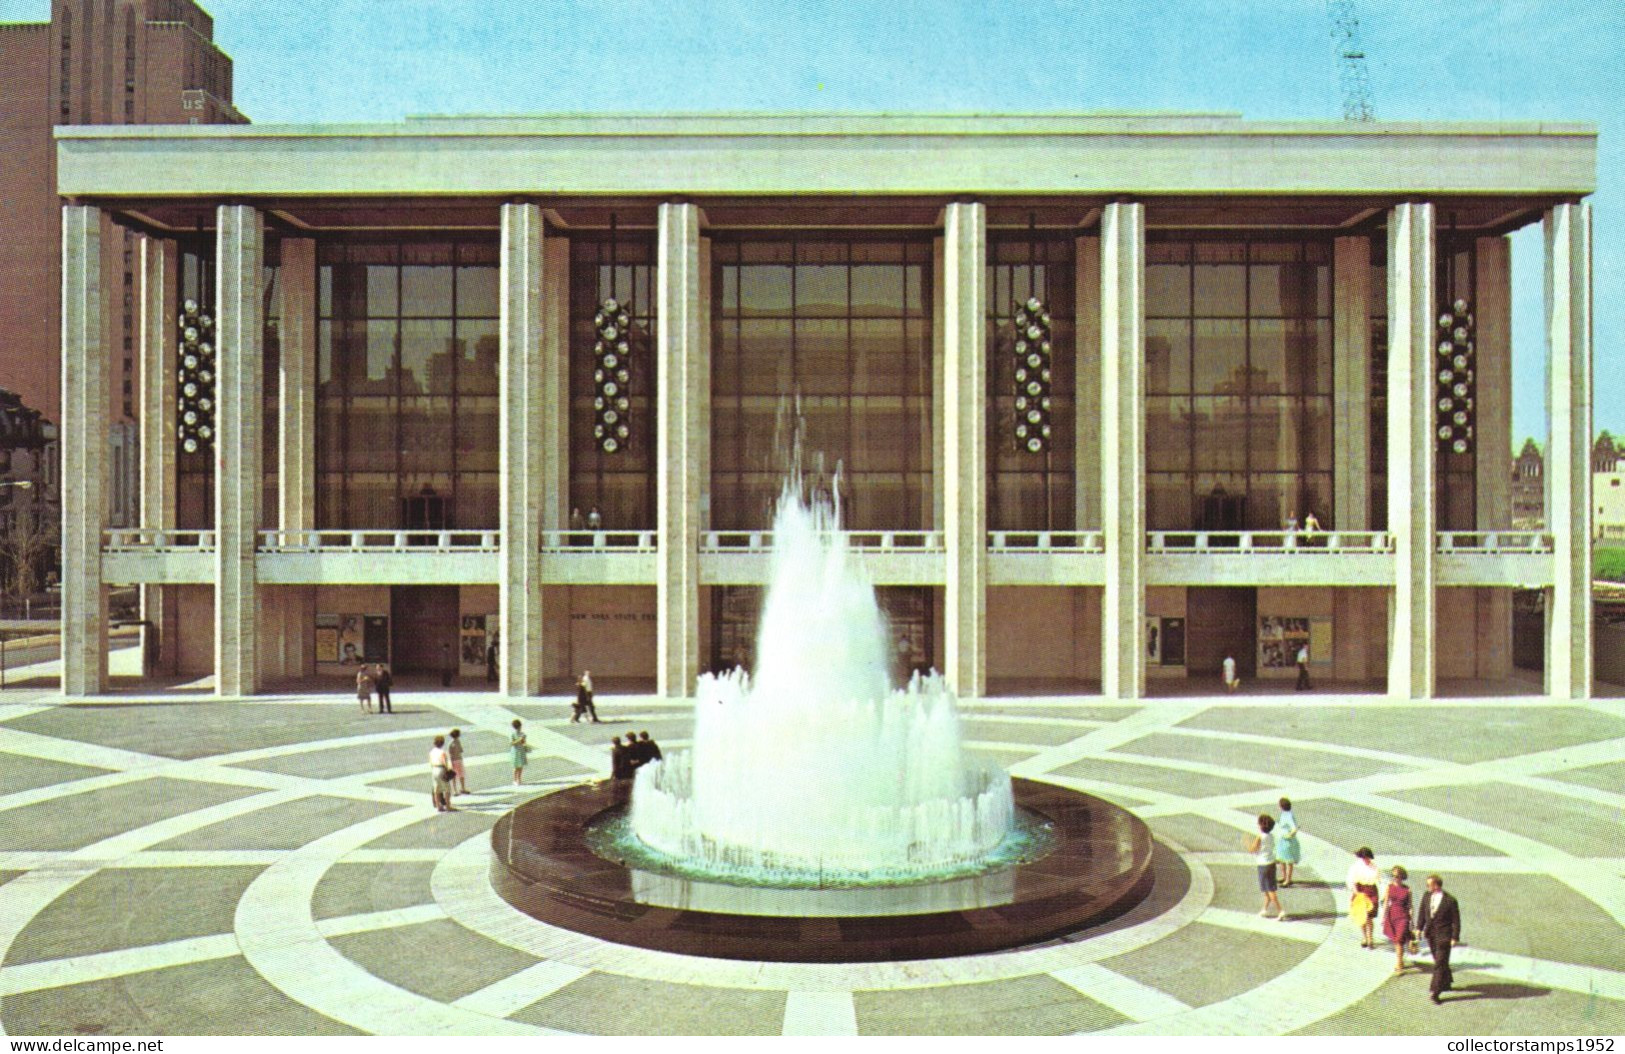 NEW YORK, LINCOLN CENTER, THEATER, ARCHITECTURE, FOUNTAIN, UNITED STATES, POSTCARD - Autres Monuments, édifices